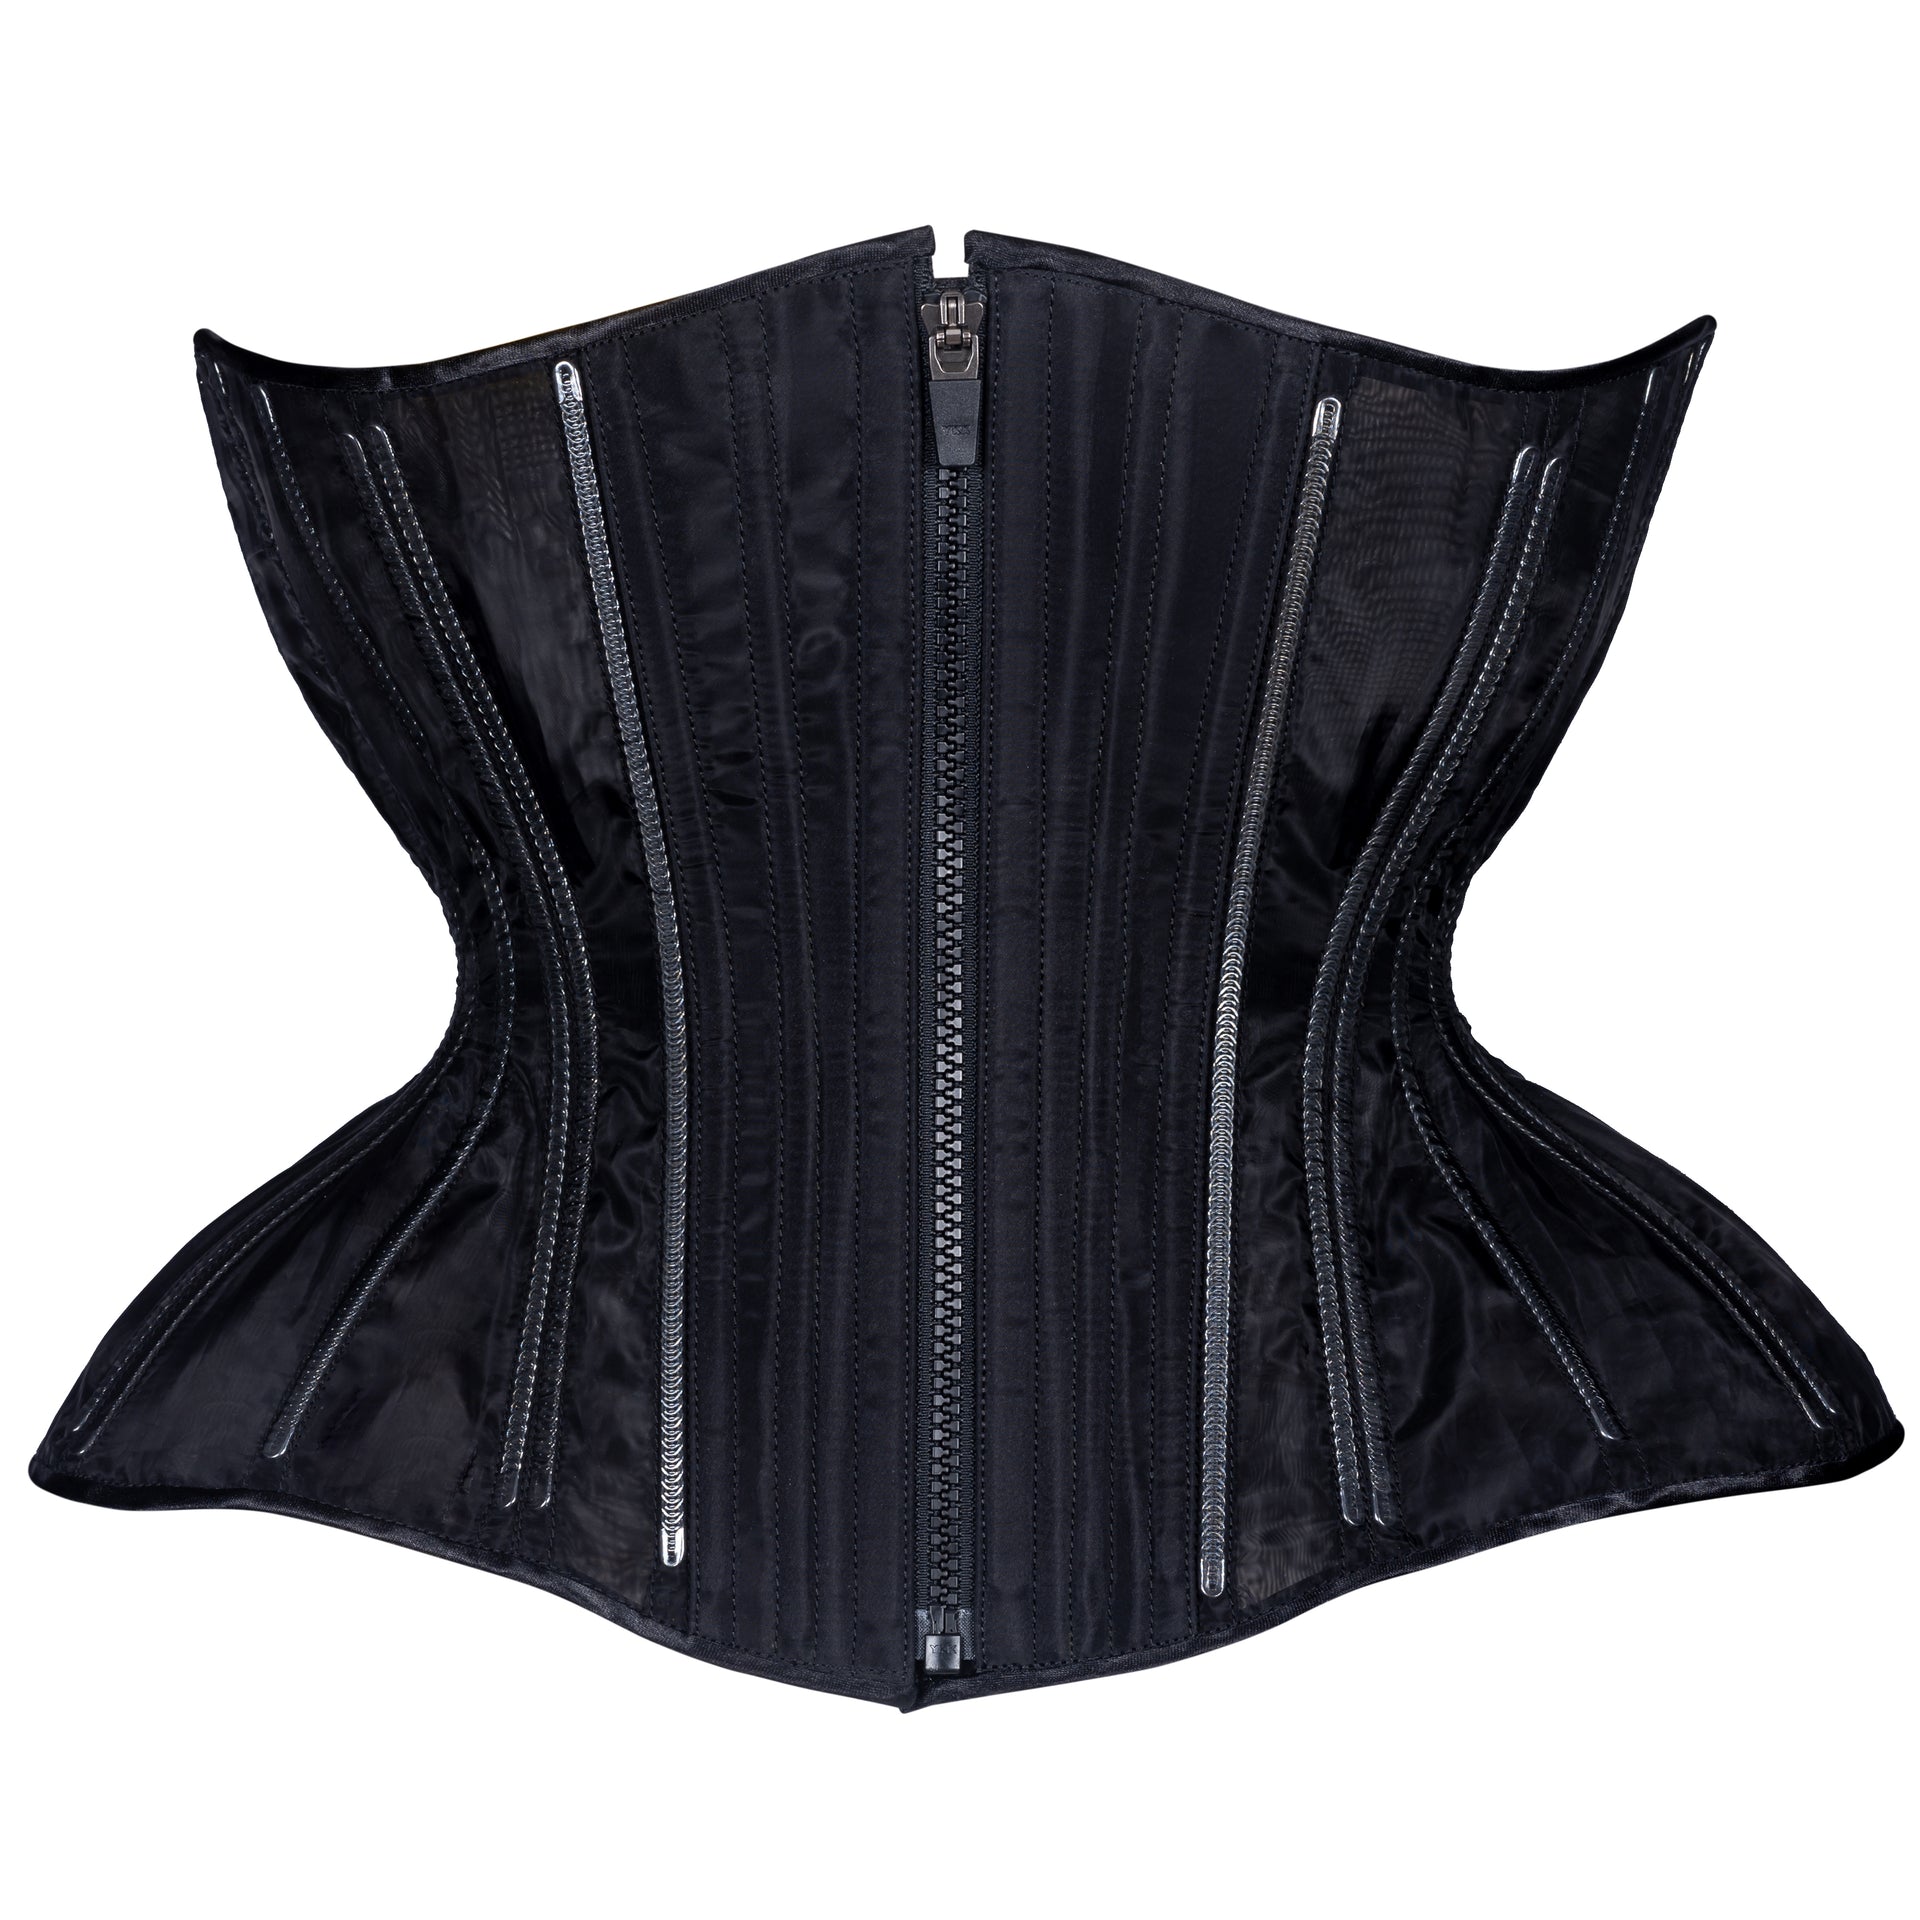 Find Cheap, Fashionable and Slimming half cup corset bustier 